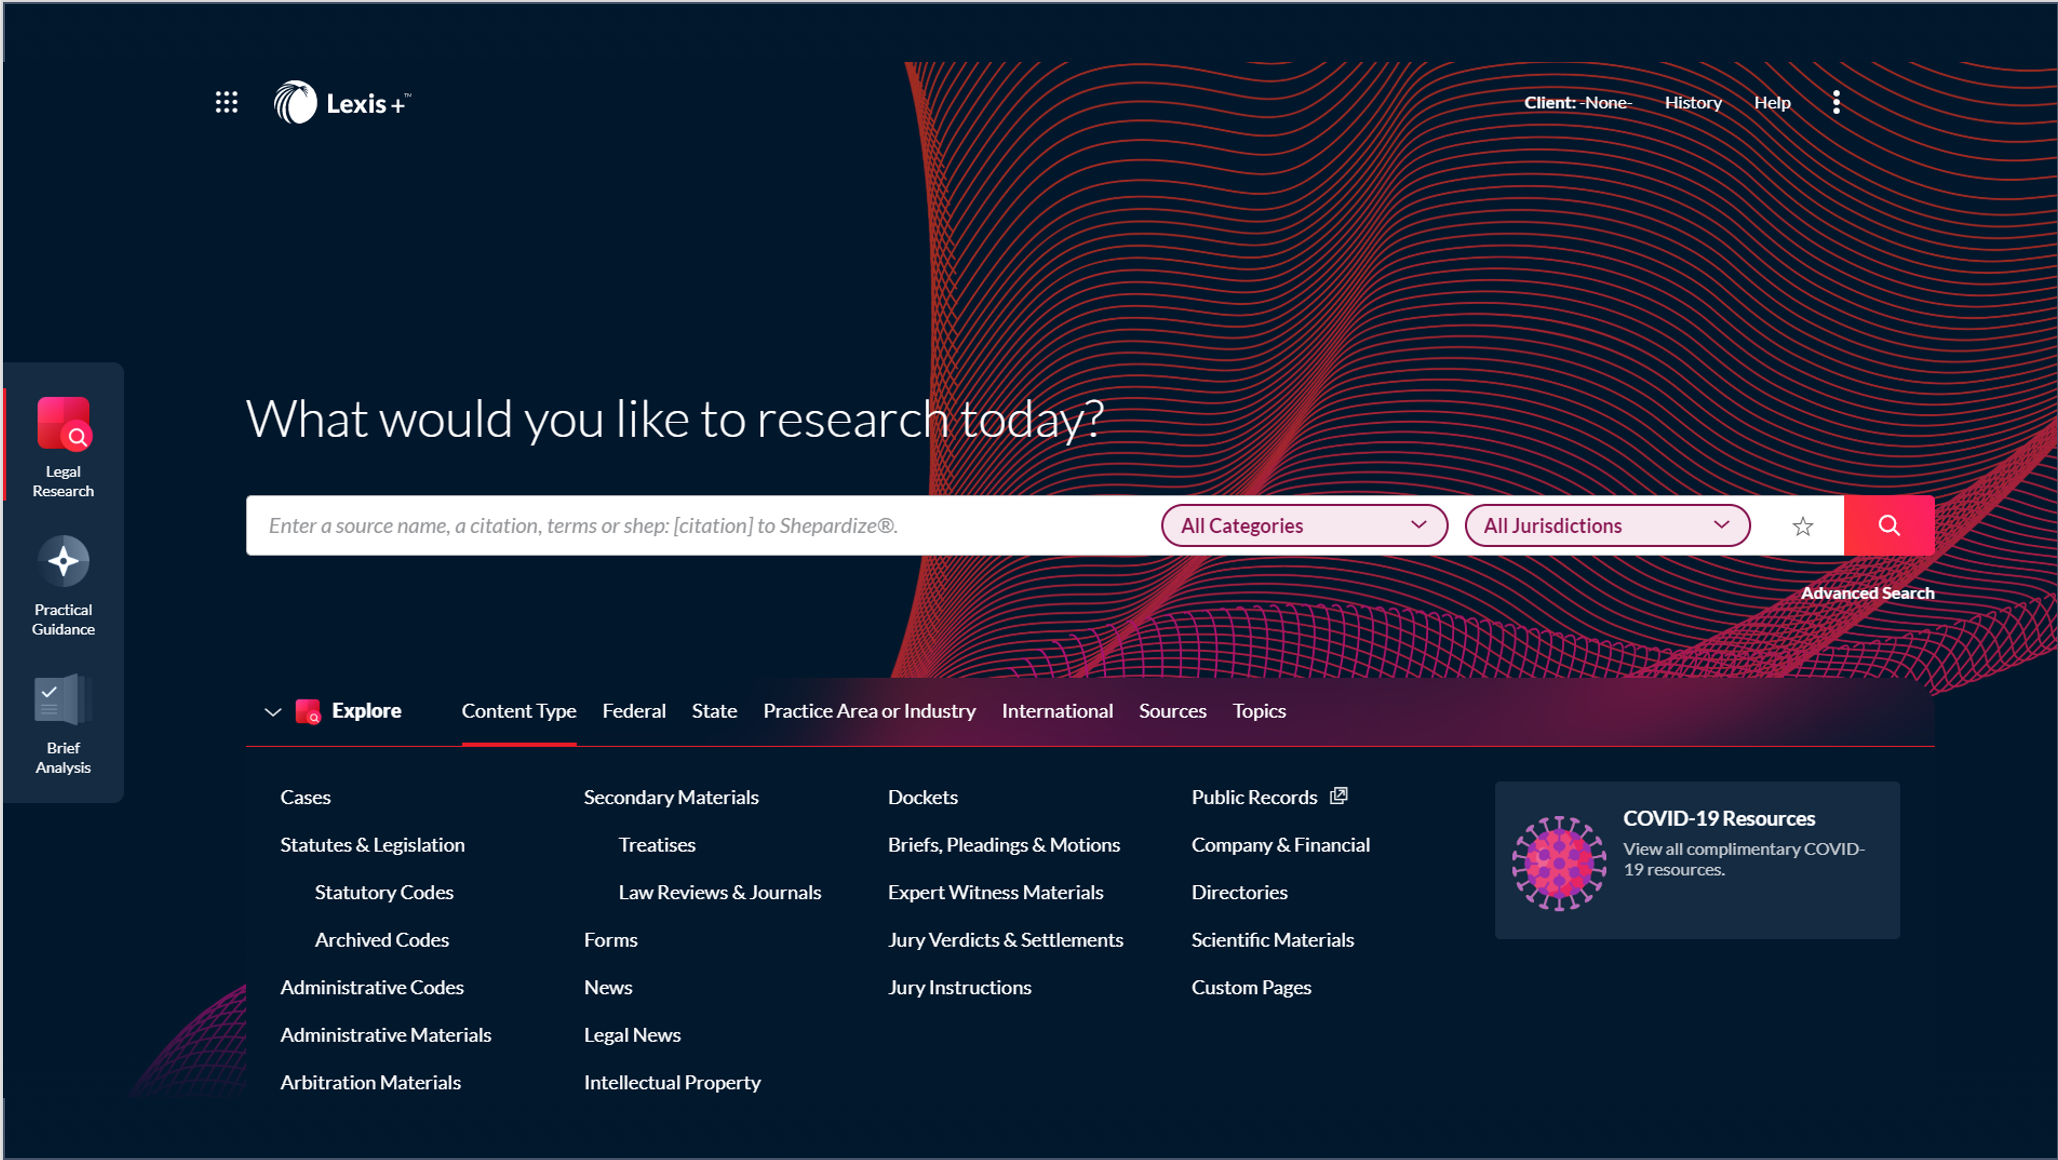 LexisNexis Launches An All-New Premium Legal Research Service